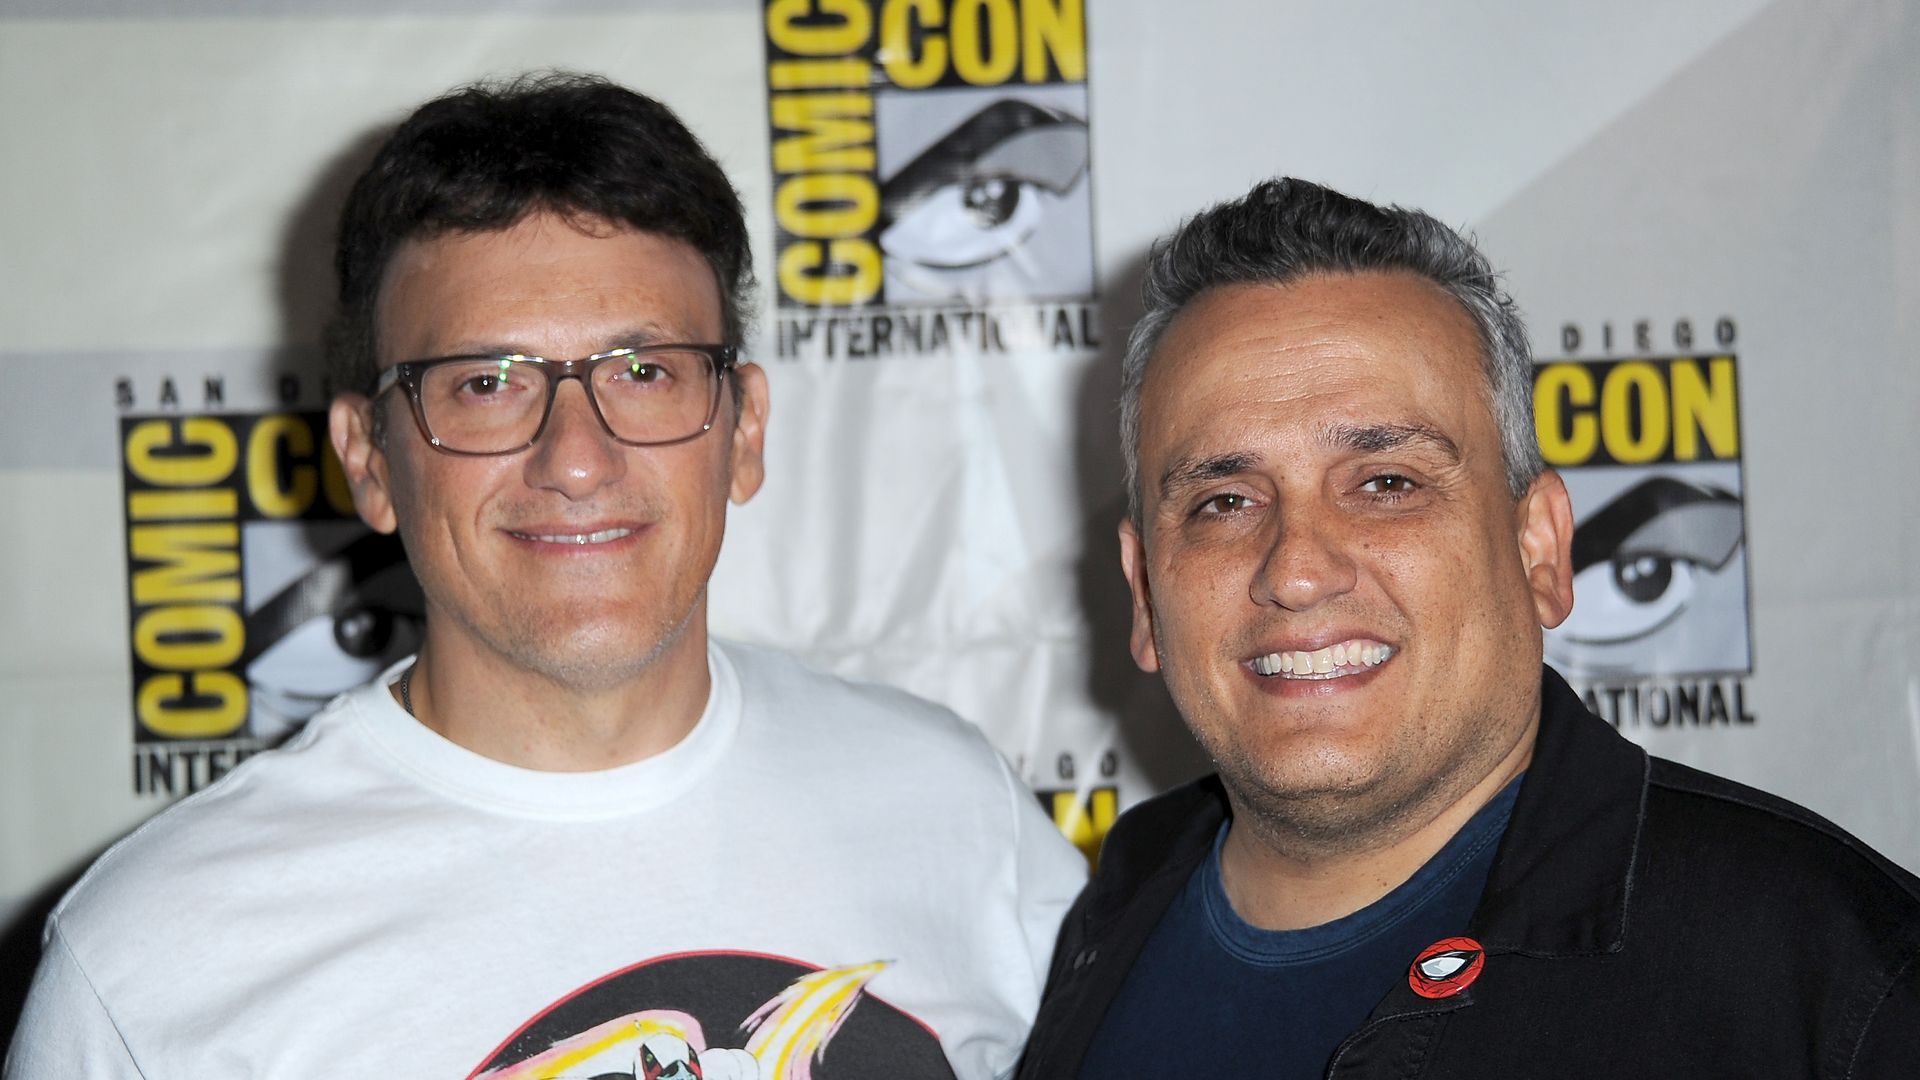 Anthony Russo and Joe Russo at 2019 Comic-Con International in San Diego, California